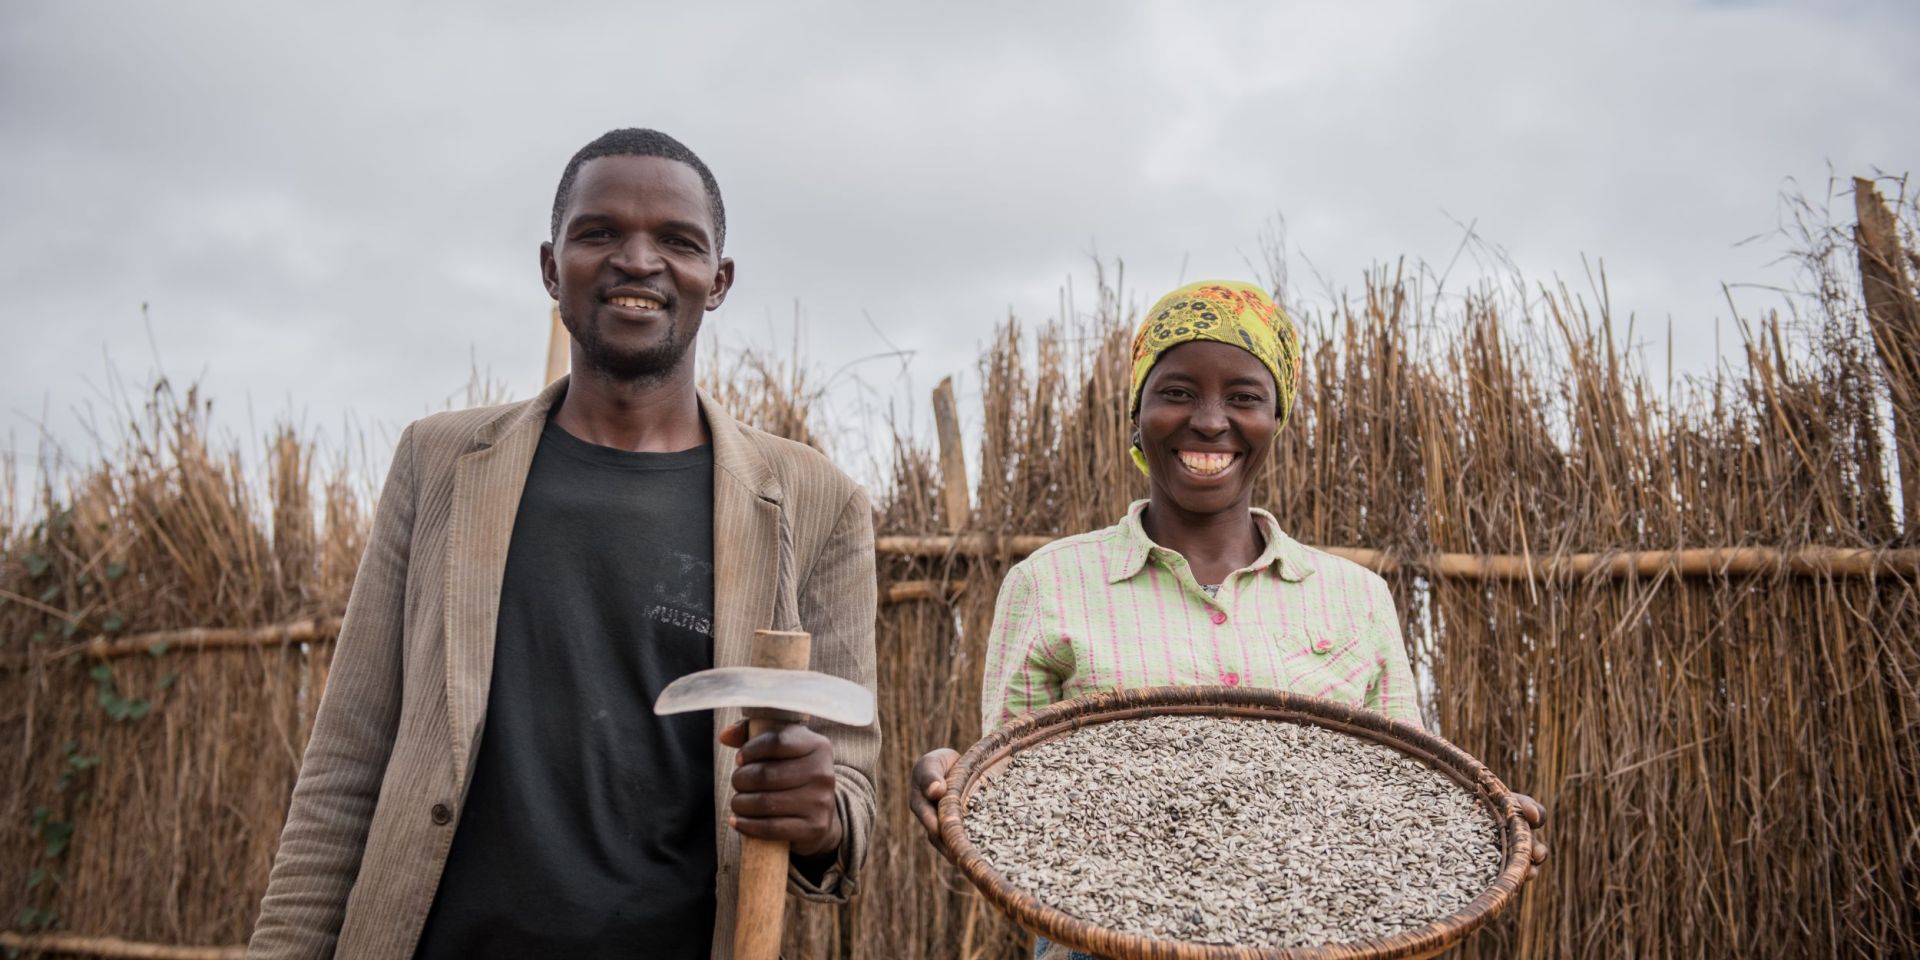 A couple stands together showing their sunflower seeds harvest